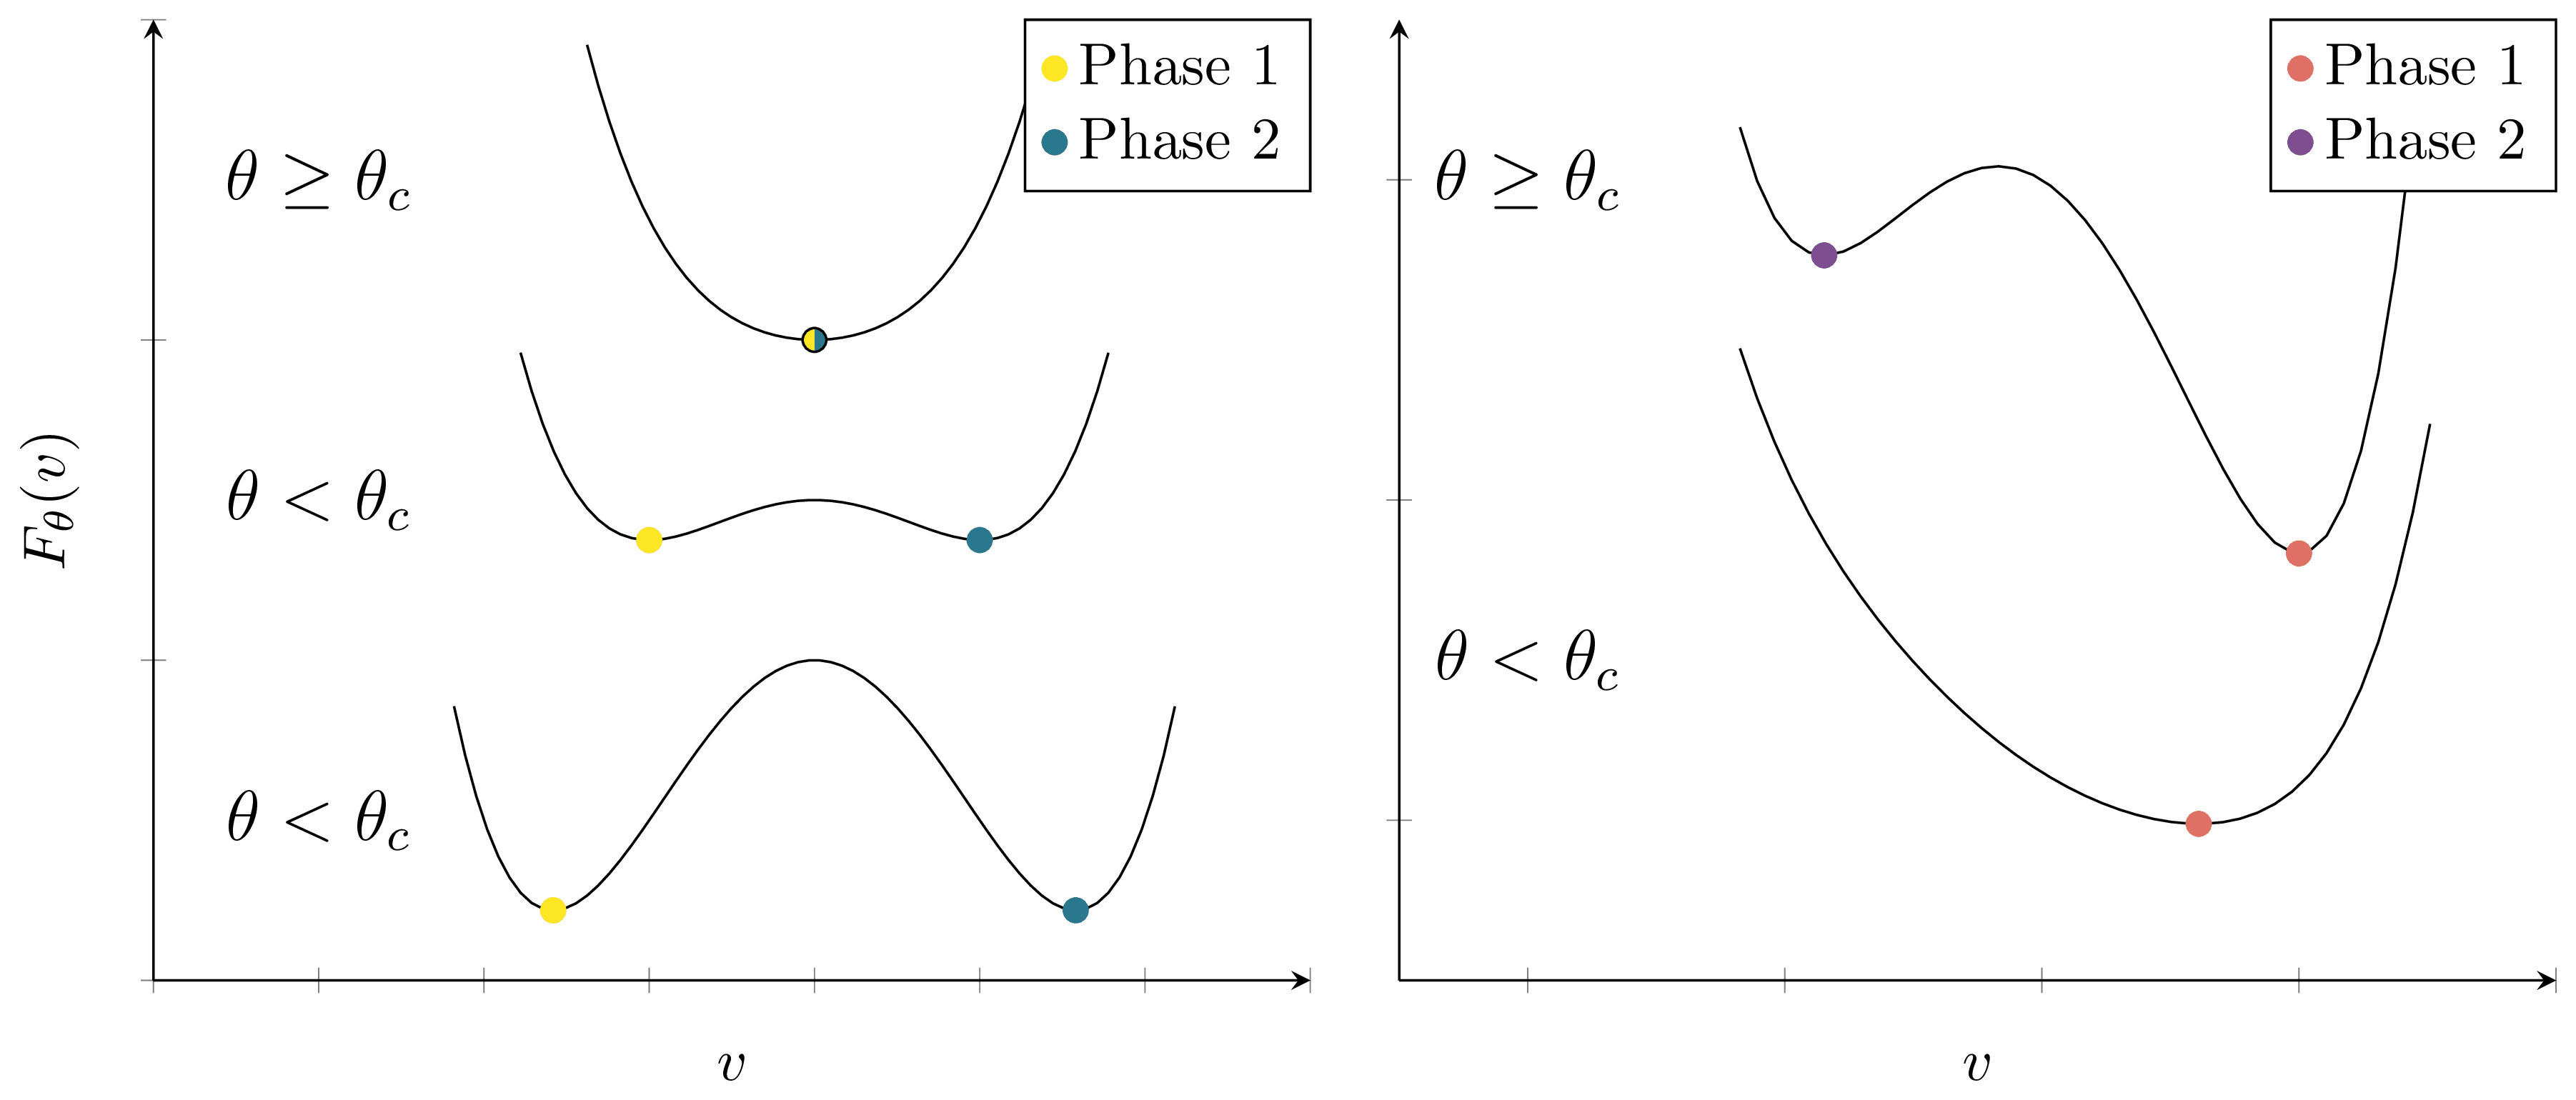 Second order phase transitions